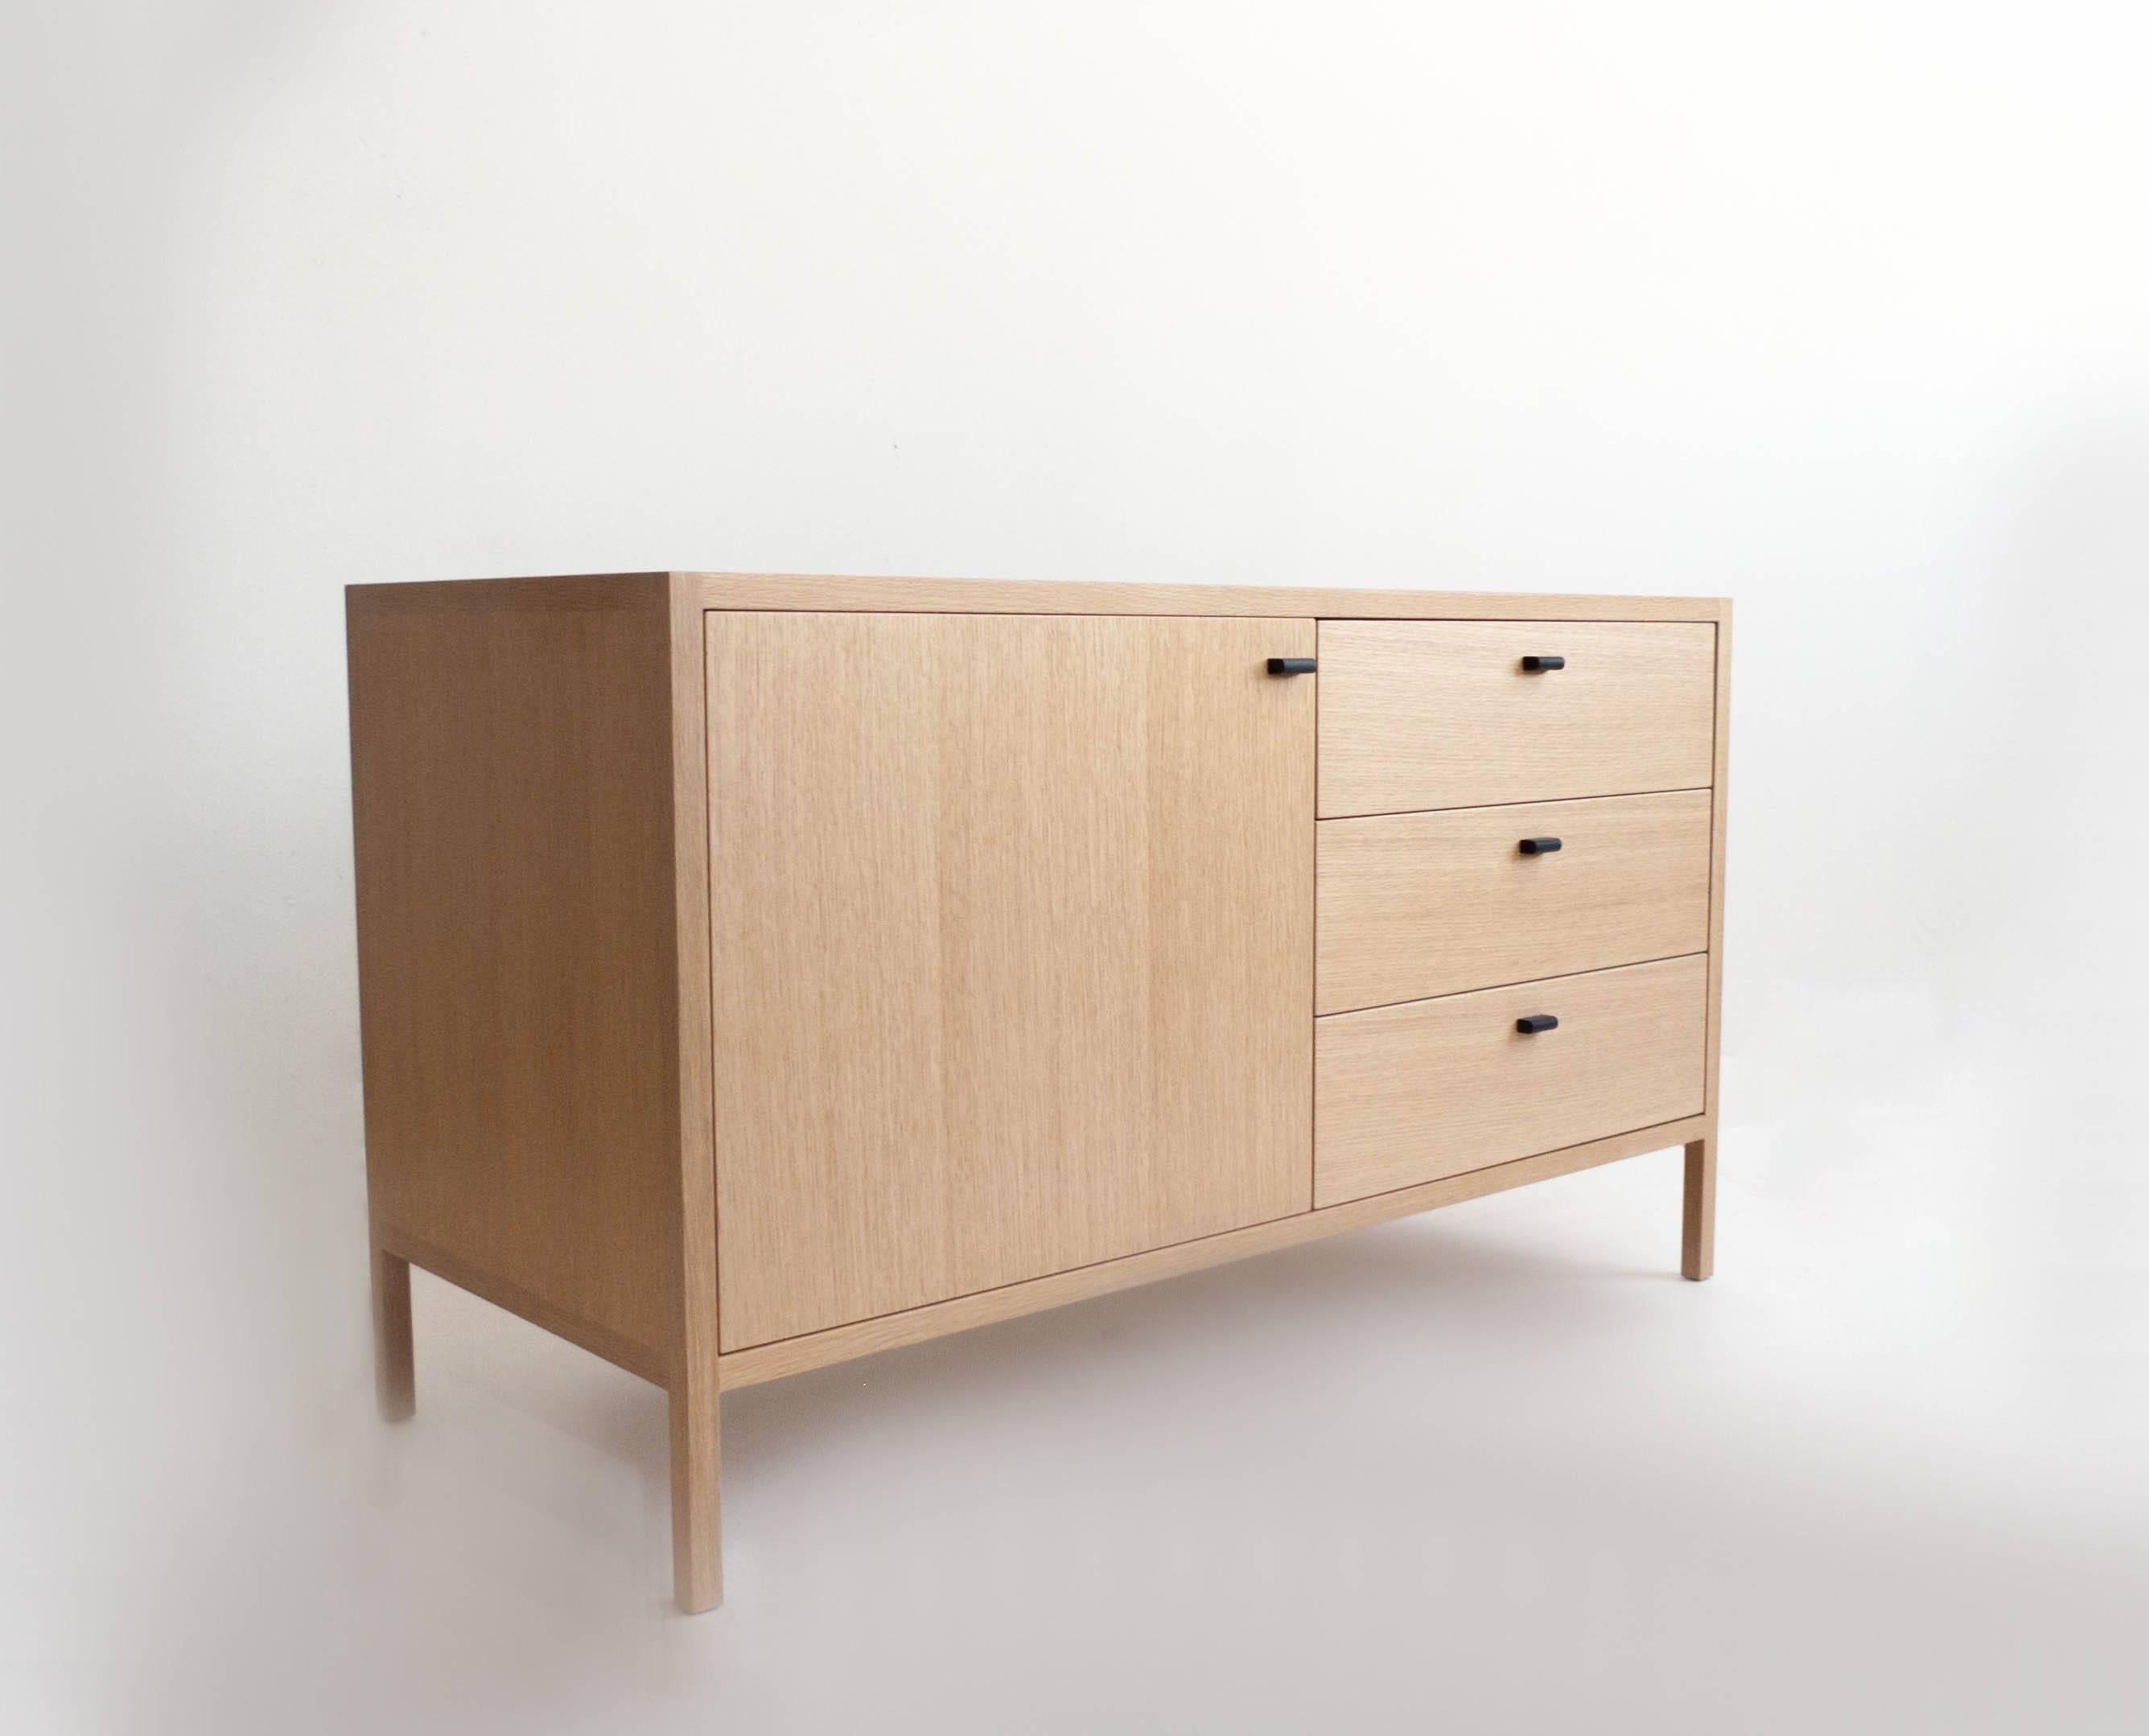 The Laska credenza is built in our Louisville, KY studio using premium hardwoods and thoughtfully selected wood veneers. This piece features custom veneered panels framed flush with solid hardwood edges and legs. The three solid wood drawers ride on